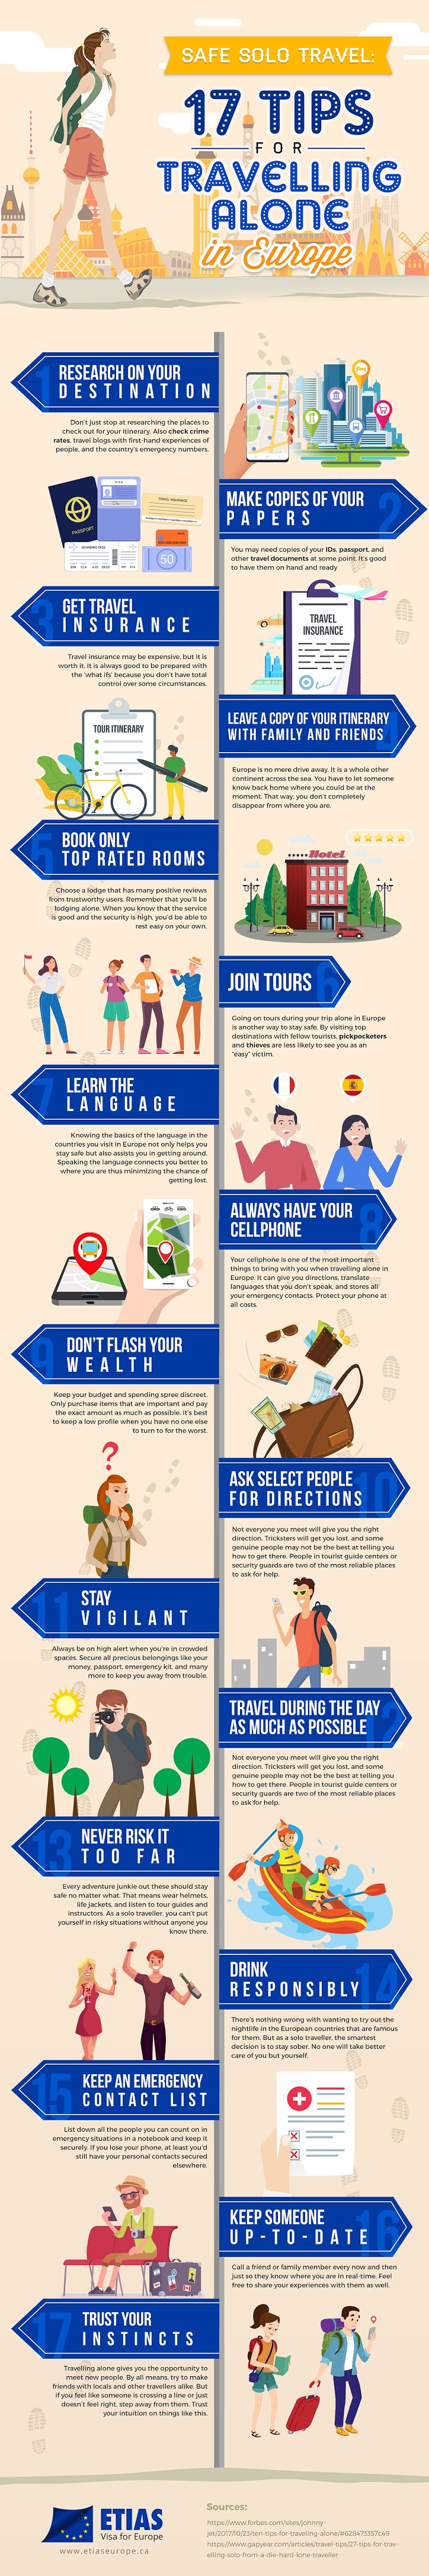 17 Tips for Travelling Alone in Europe #infographic